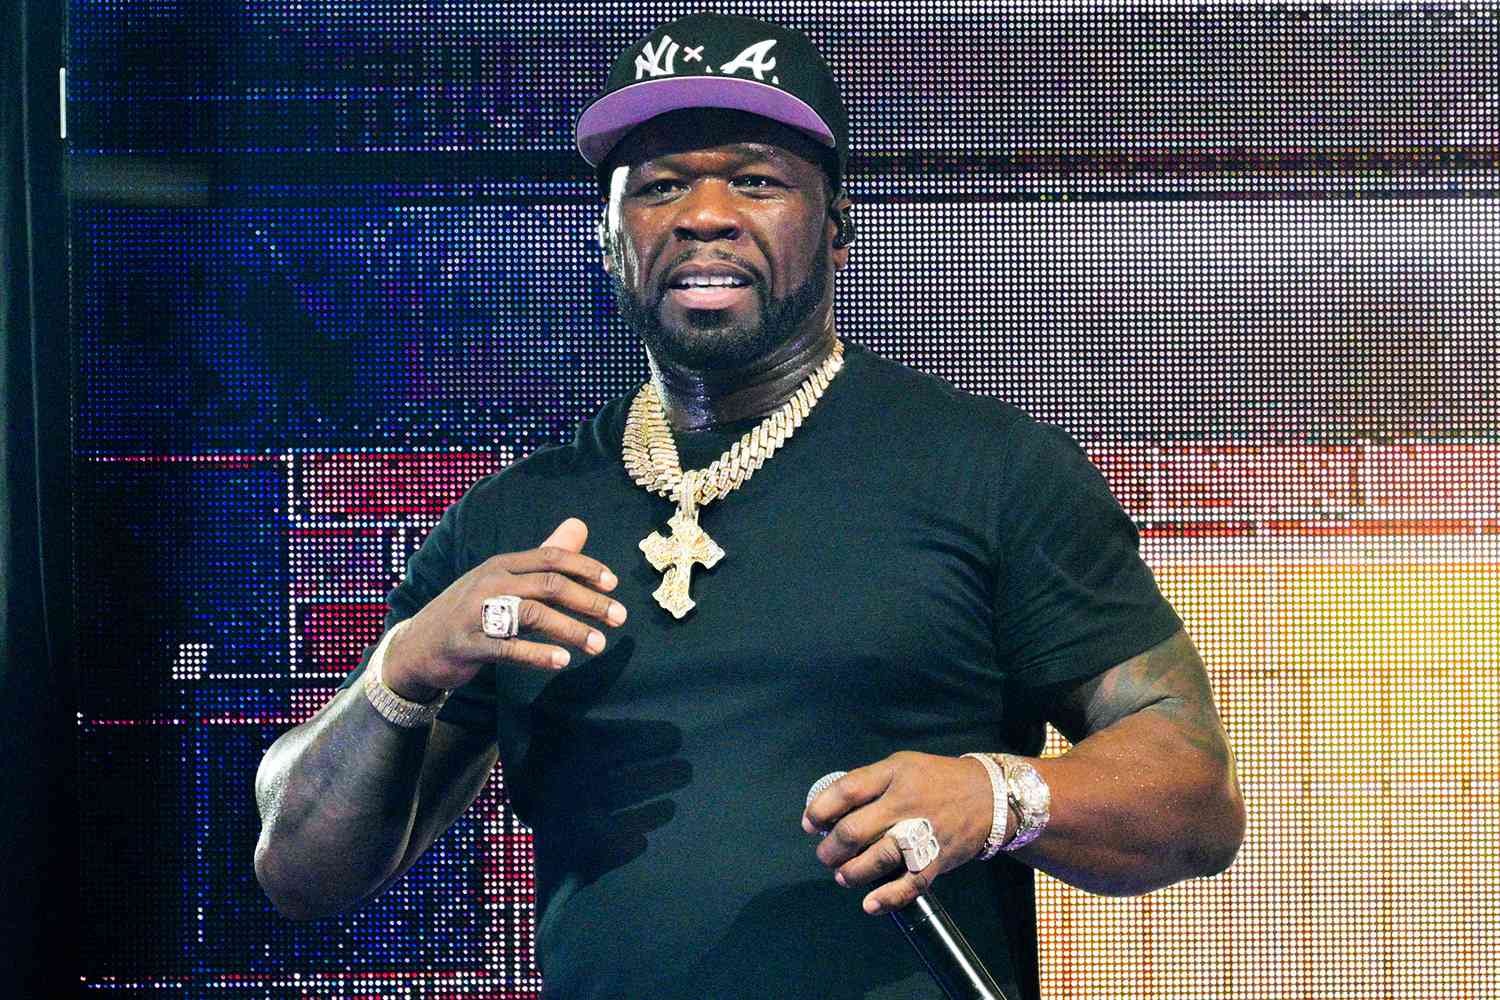 50 Cent Avoids Criminal Charge for Mic-Throwing Case: Report